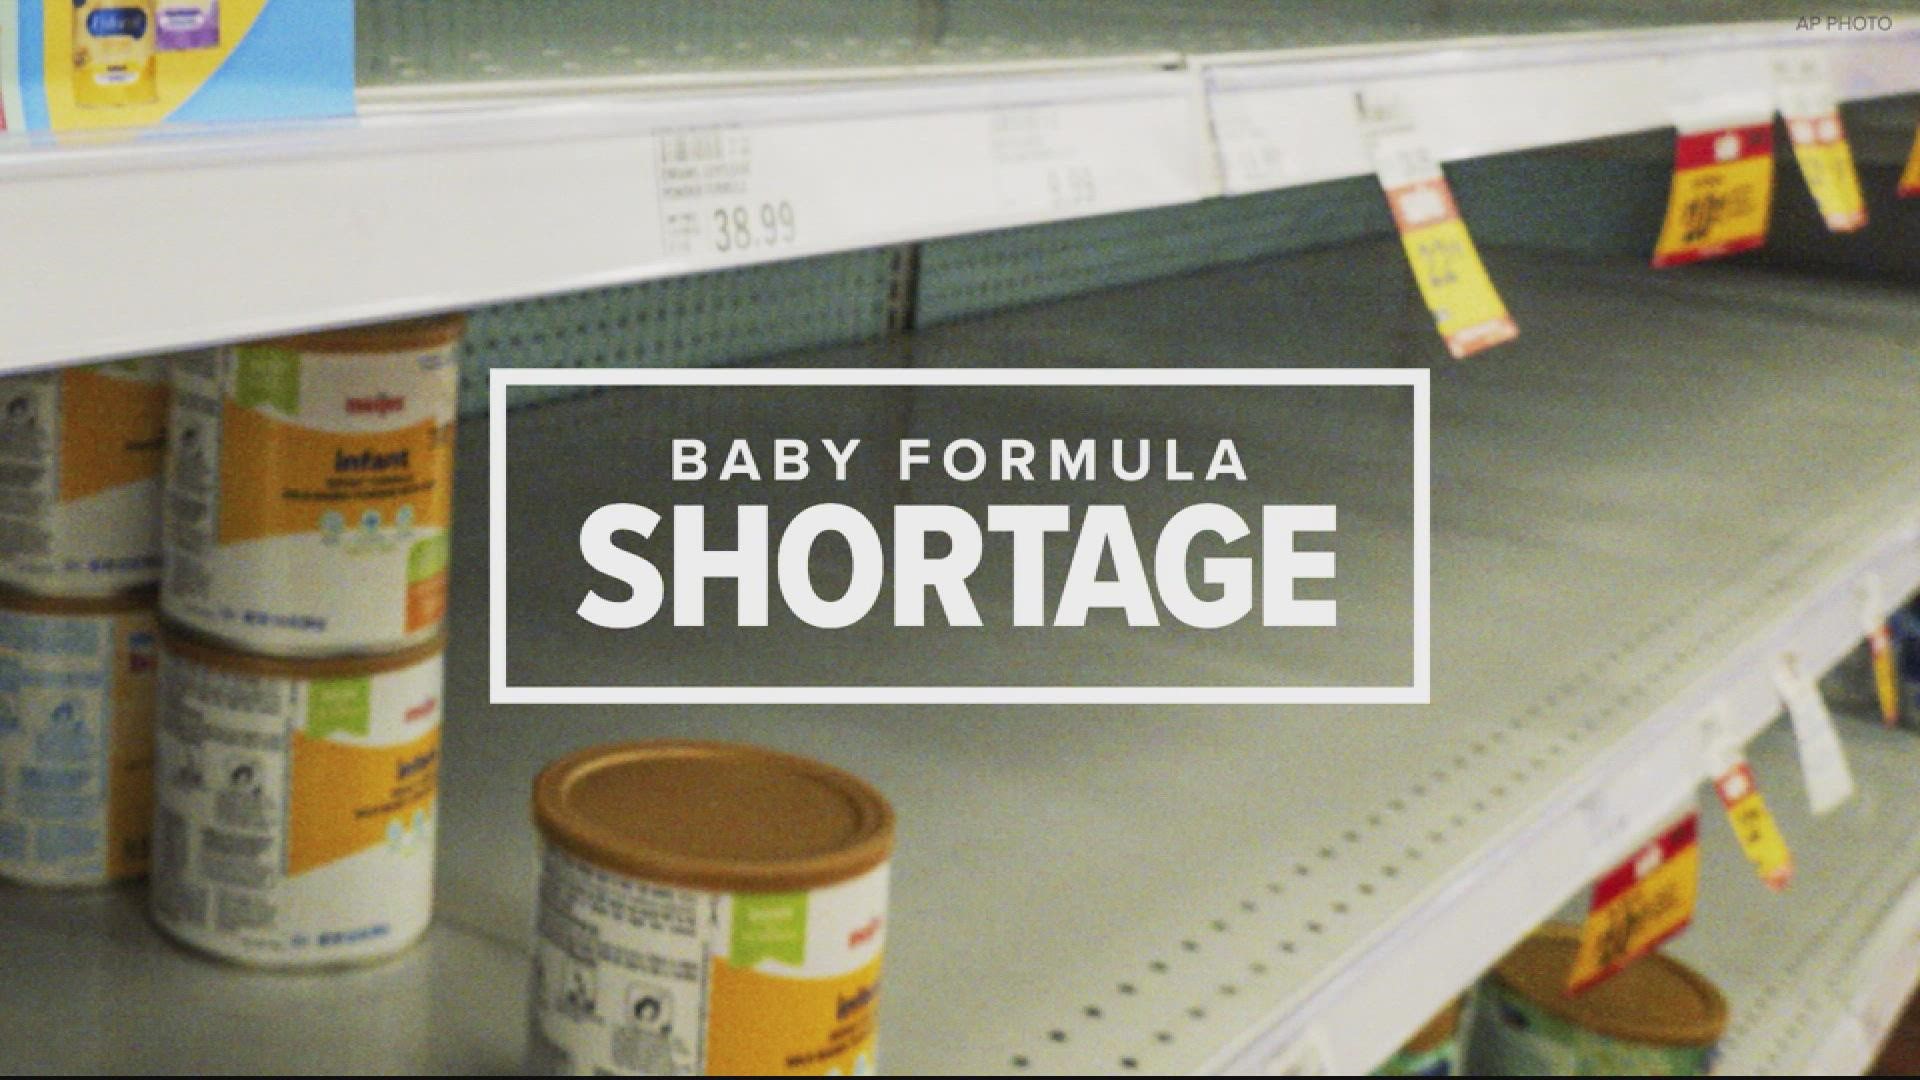 The Arroyo family says they are forced to feed their two-year-old daughter expired formula amid the continuing shortage.